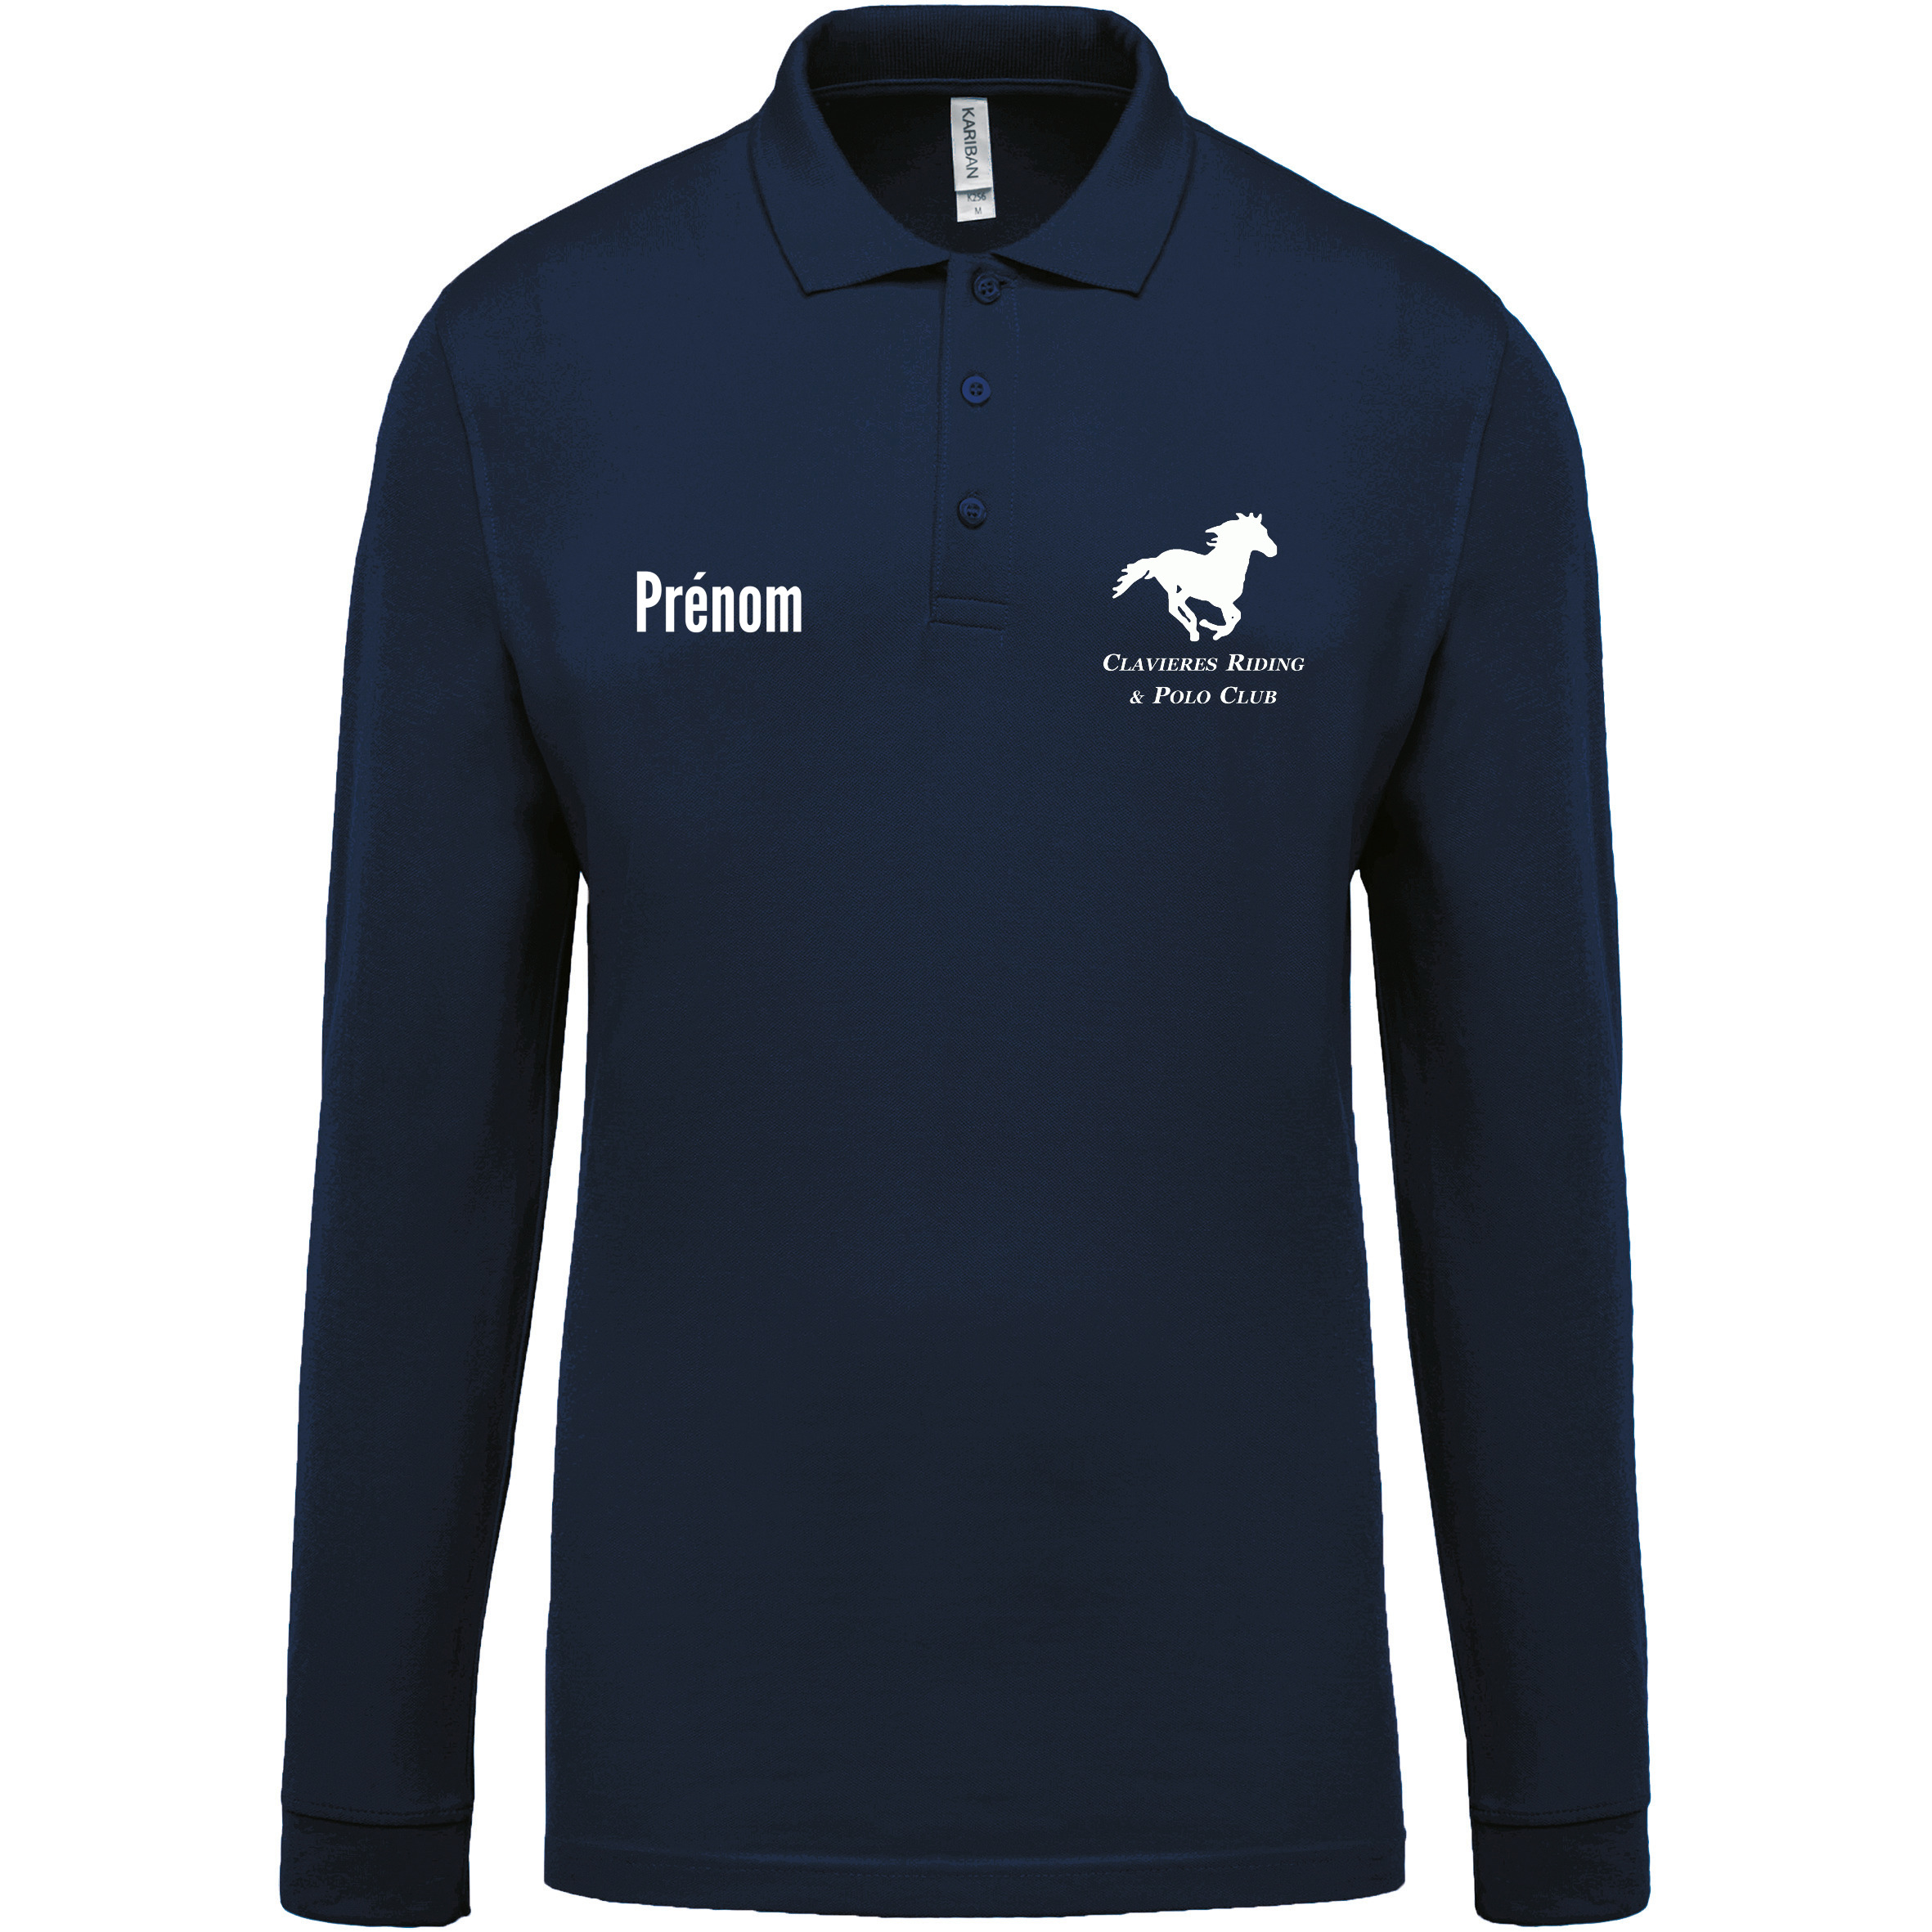 Image Polo manches longues Clavieres Riding & Polo Club 4347